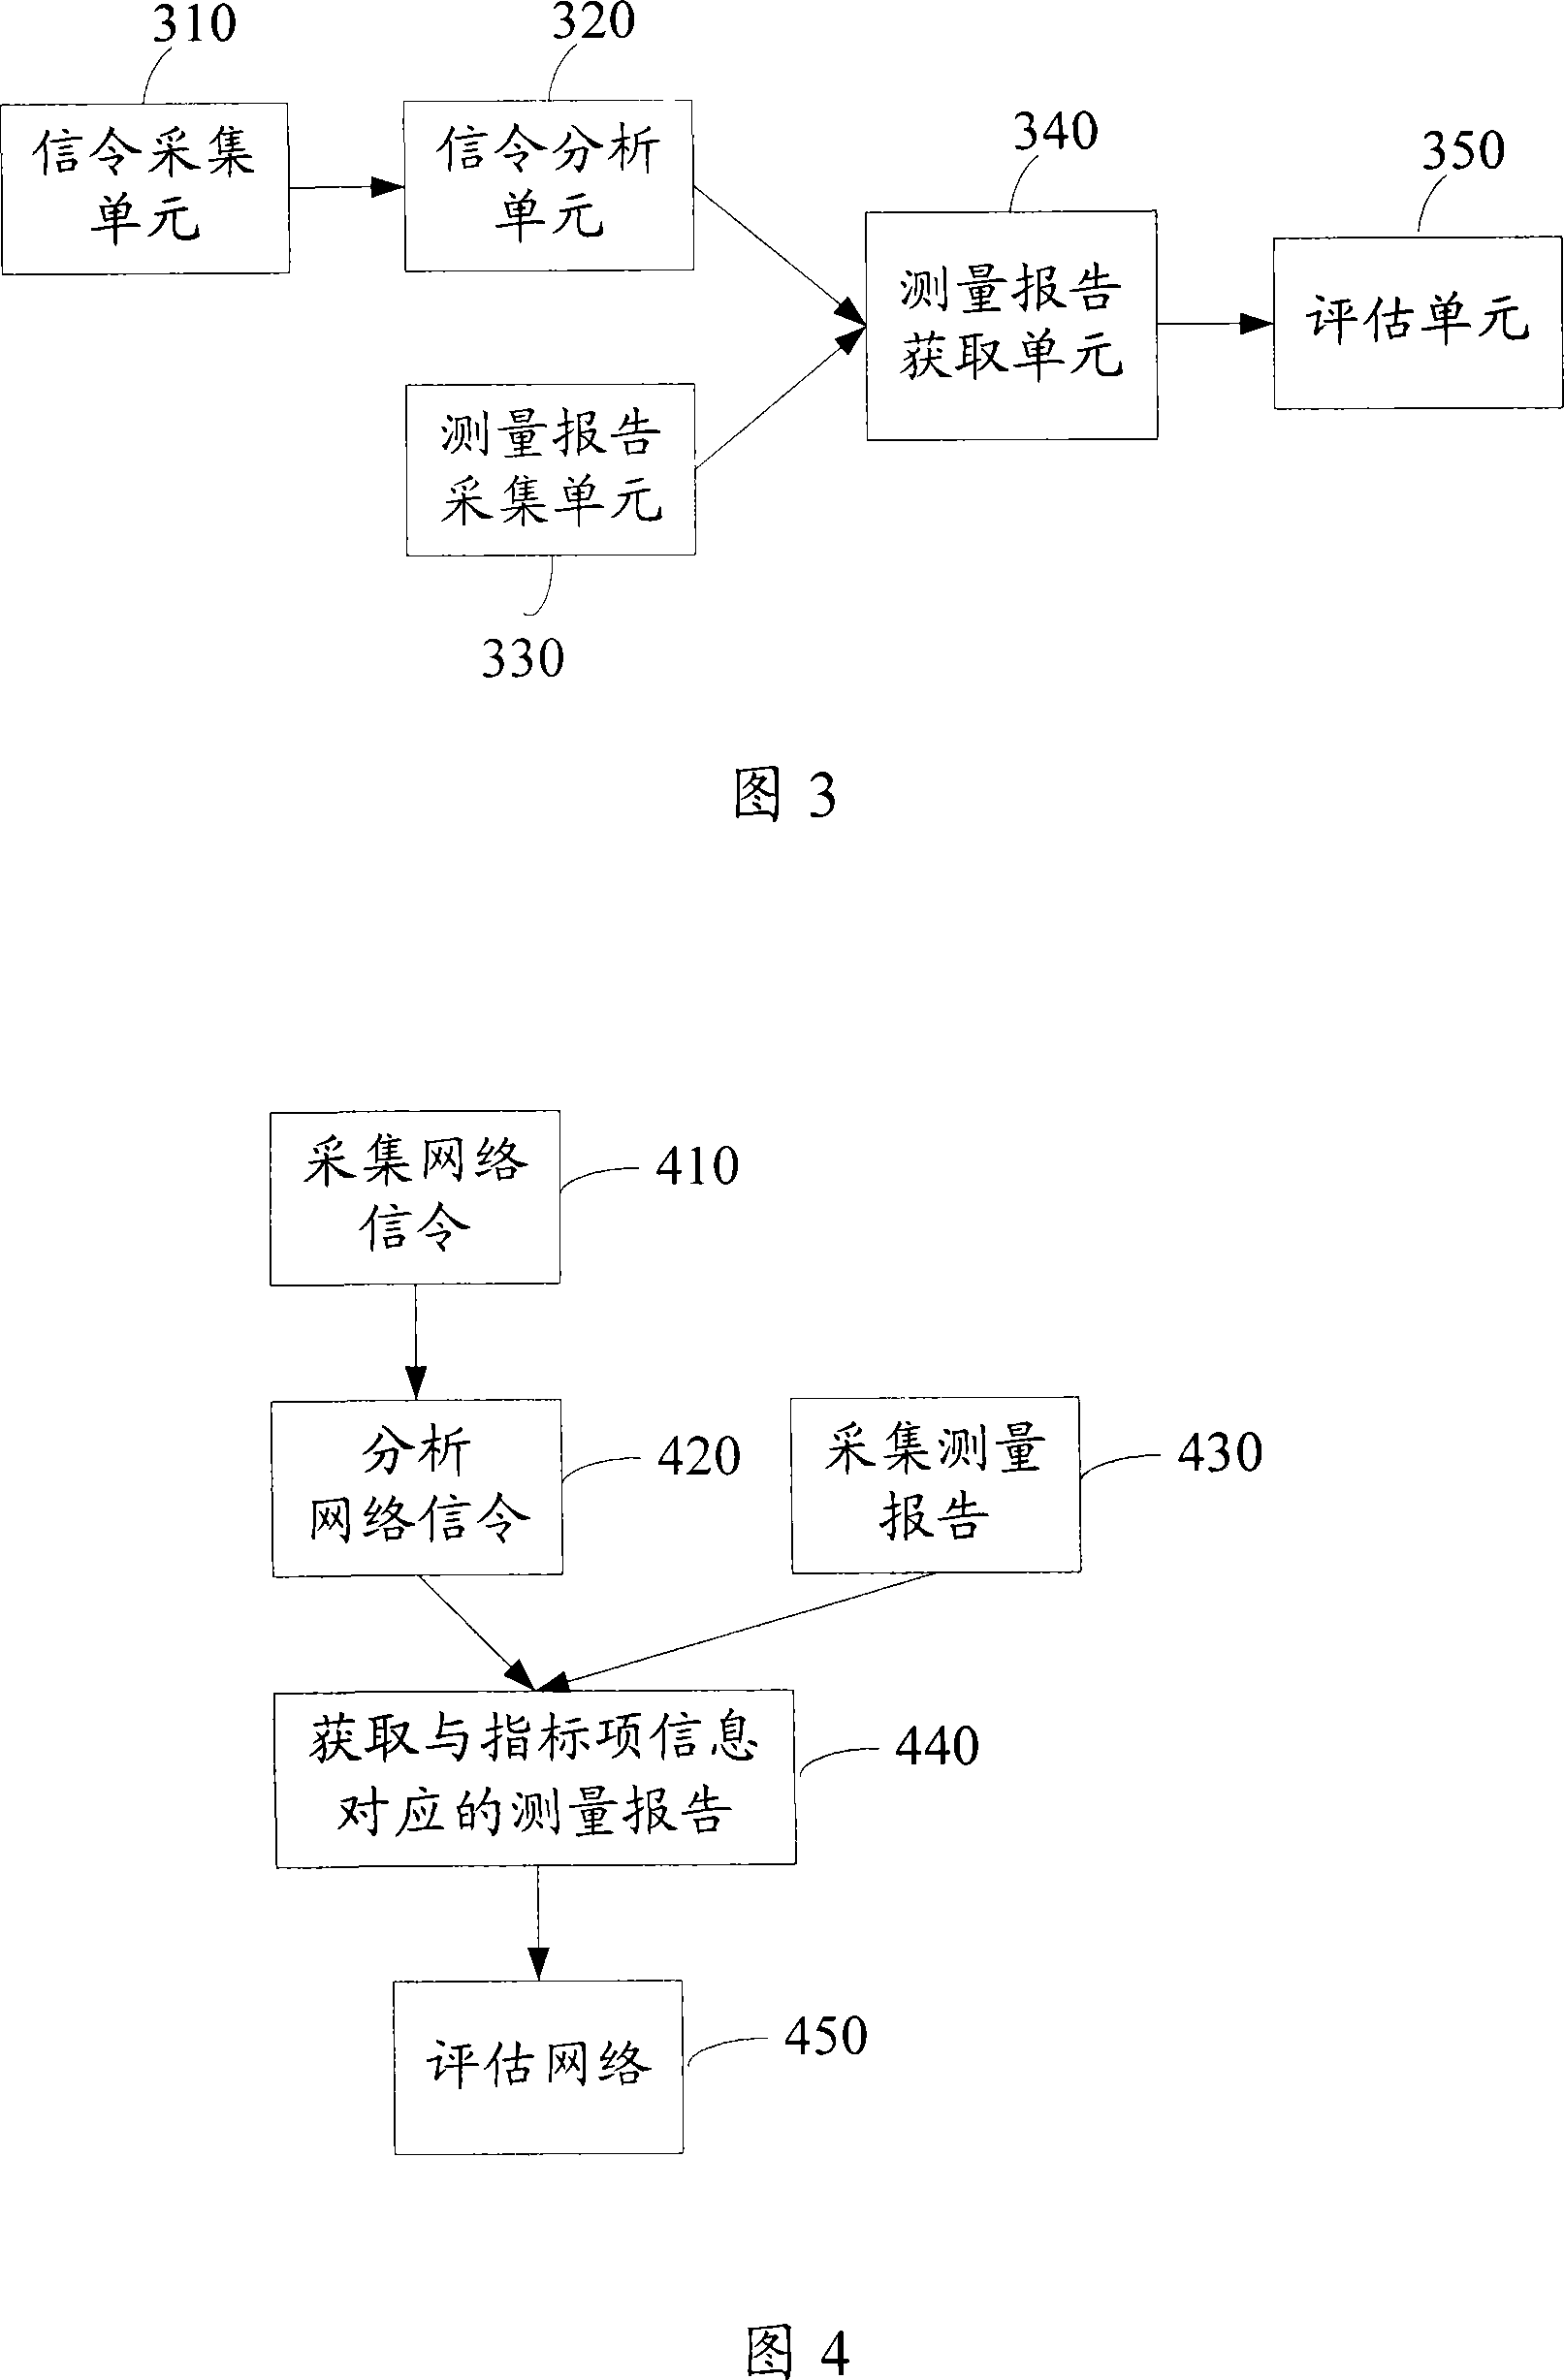 Network evaluation system and method